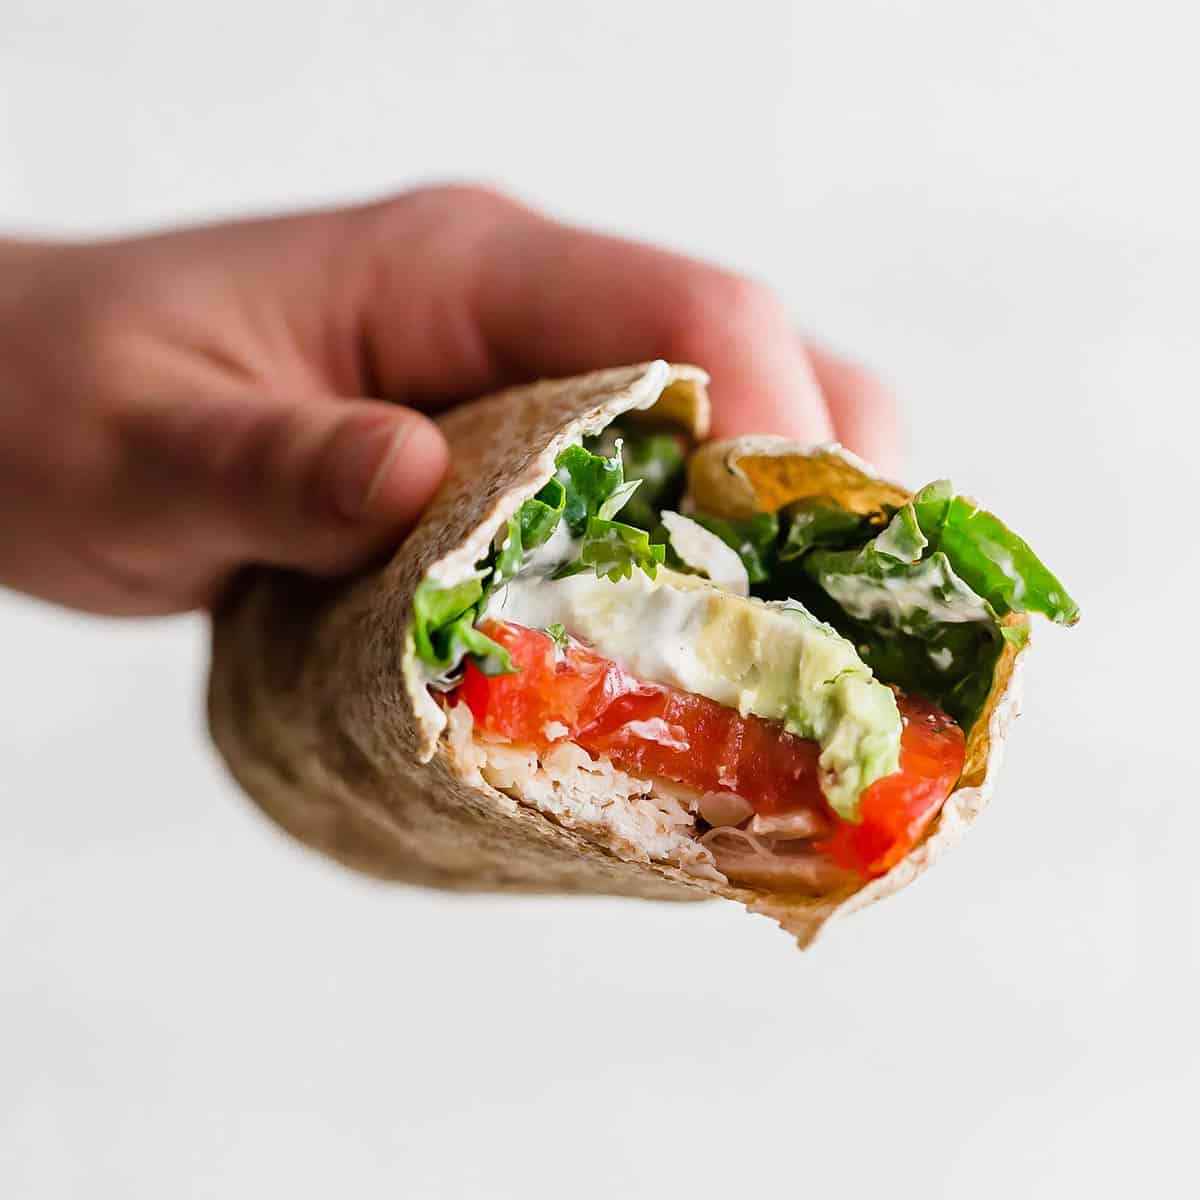 A hand holding a Healthy Chicken Wrap with a bite taken out of the wrap showing the avocado, tomato, chicken, and spinach in the wrap.